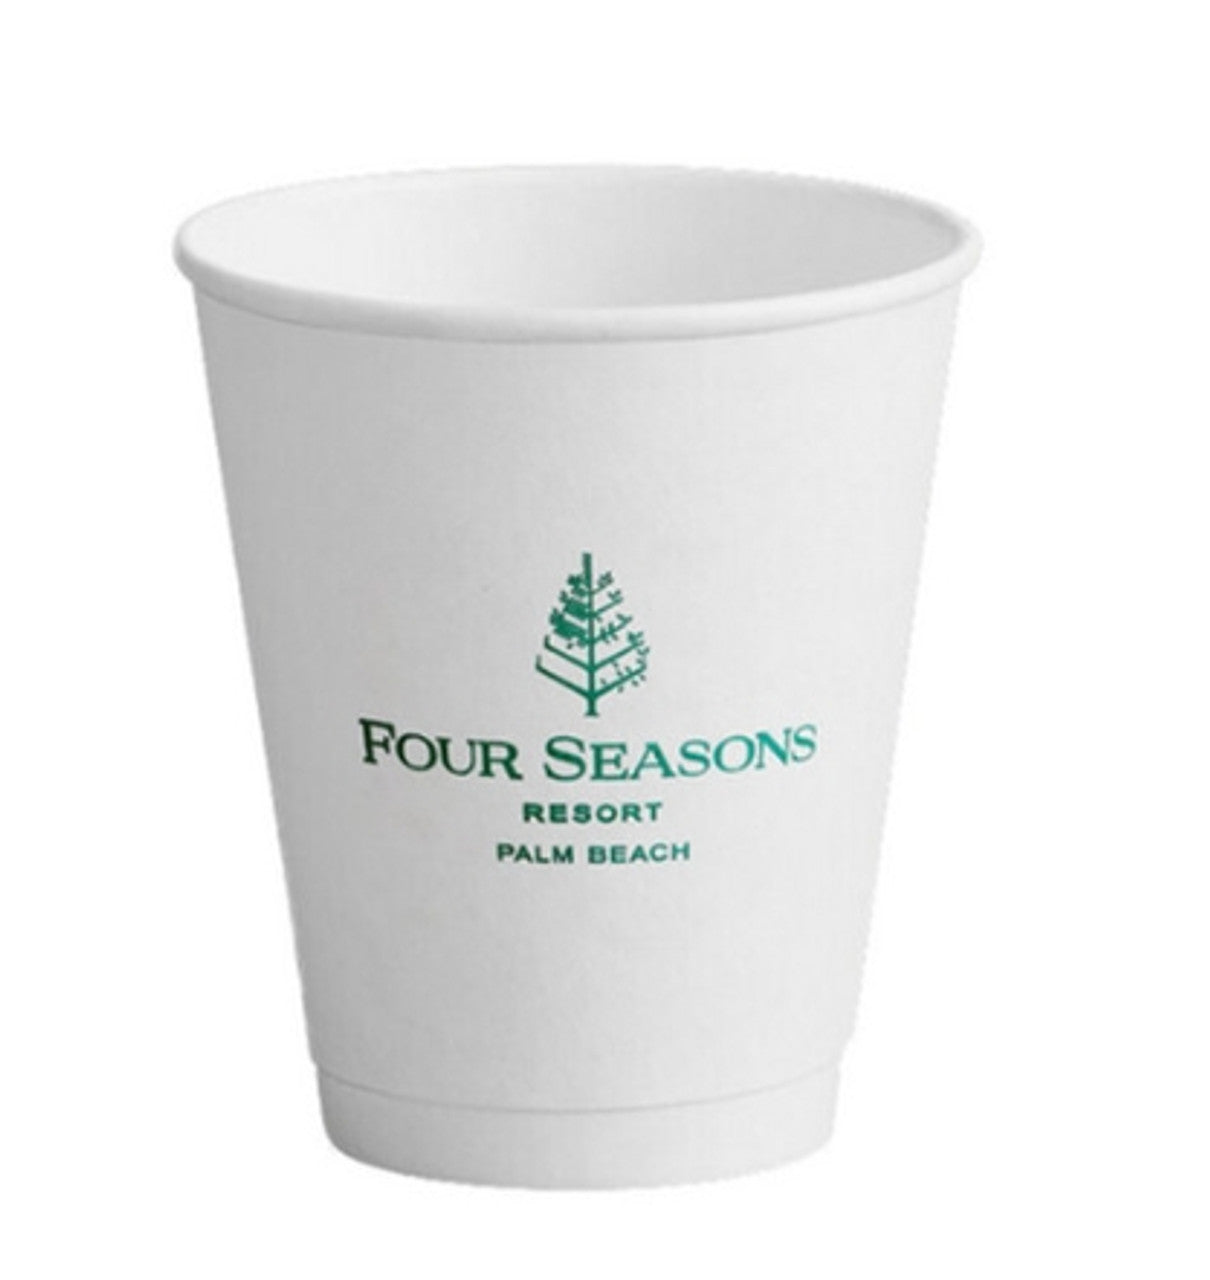 Customized 12oz Double Wall Coffee Cups 500pcs